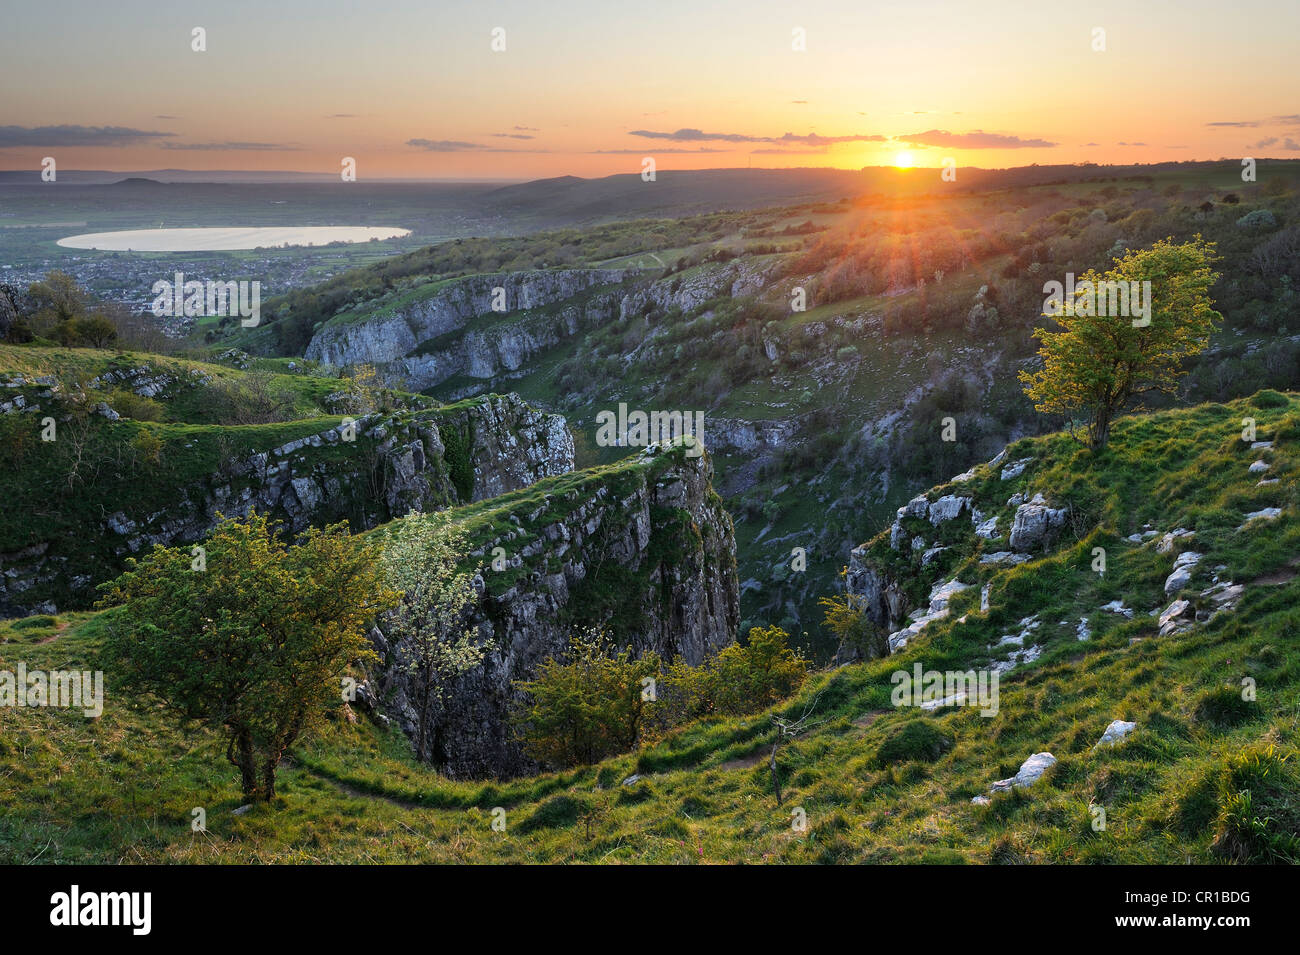 A vibrant spring sunset photographed from the Pinnacles at the top of Cheddar Gorge, Somerset, UK. Stock Photo